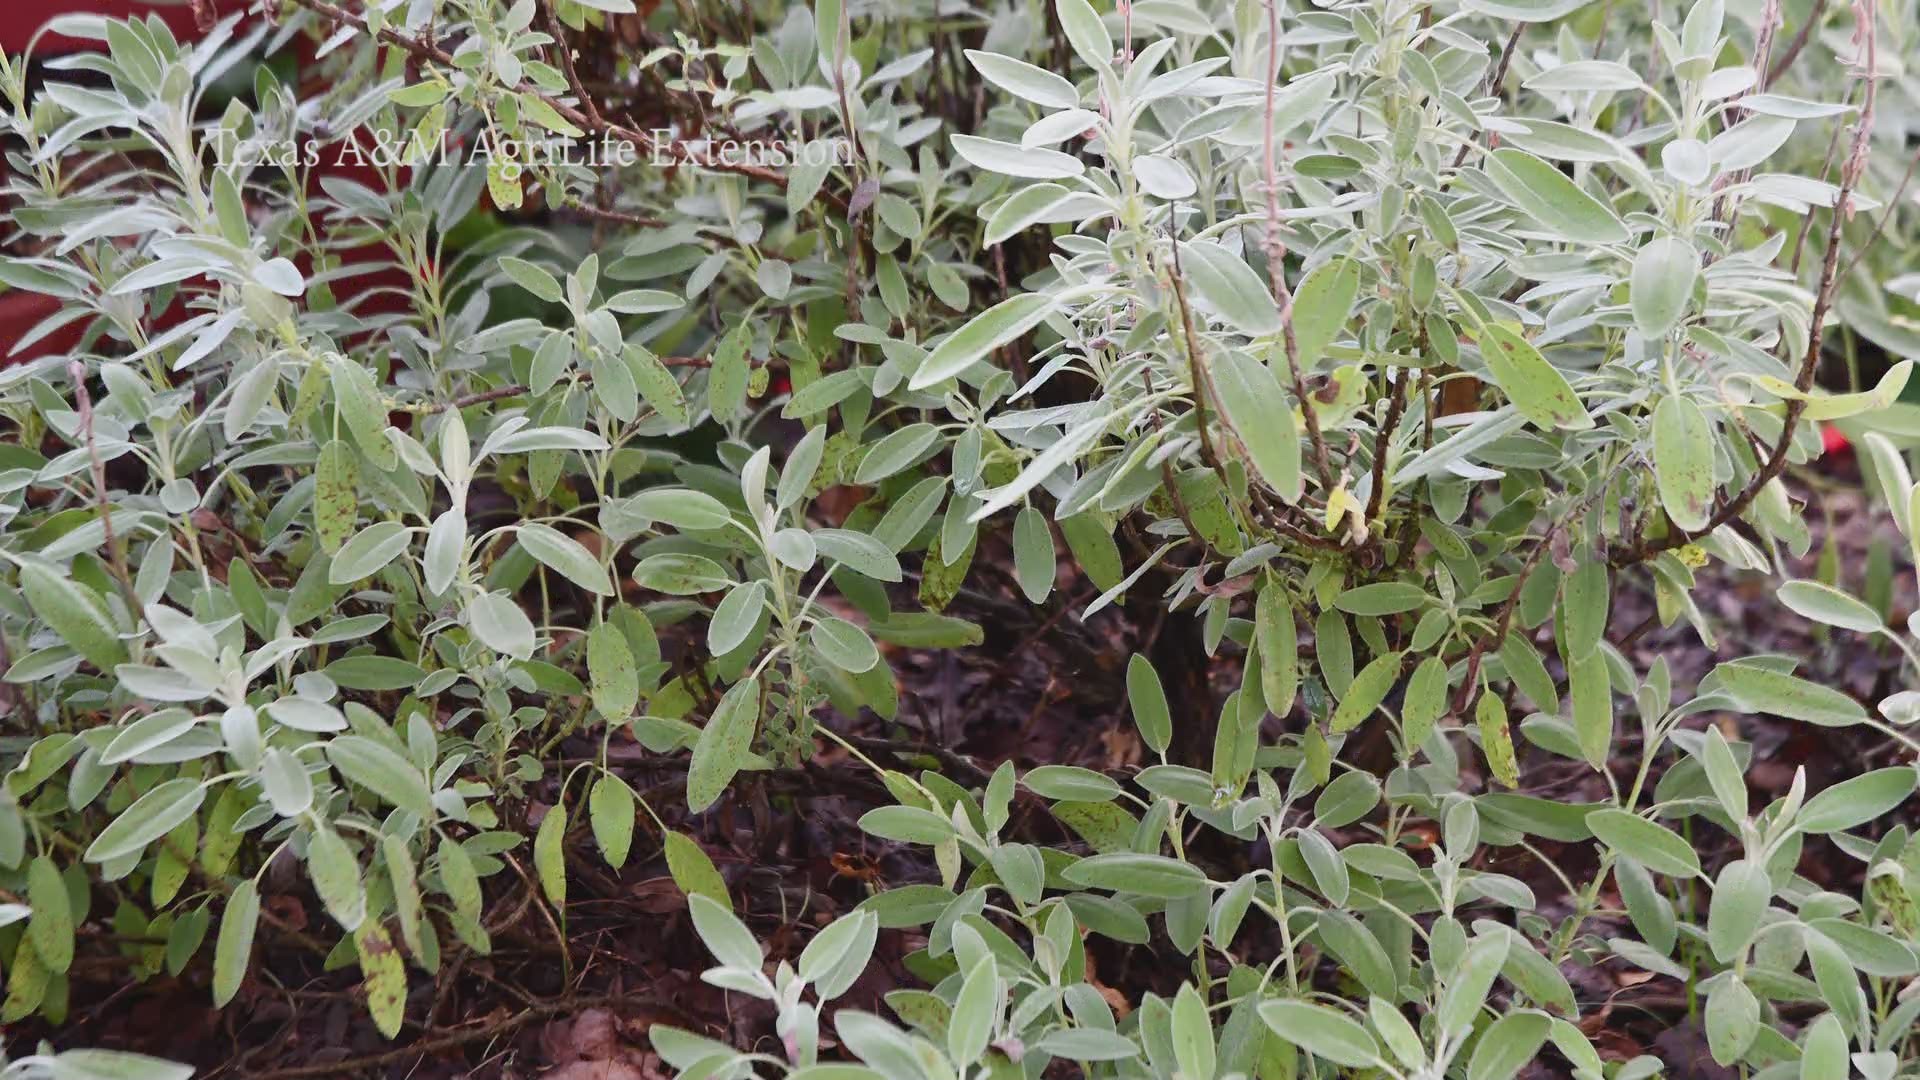 Scientist are studying sage to see if the herb has bacteria-fighting agents.